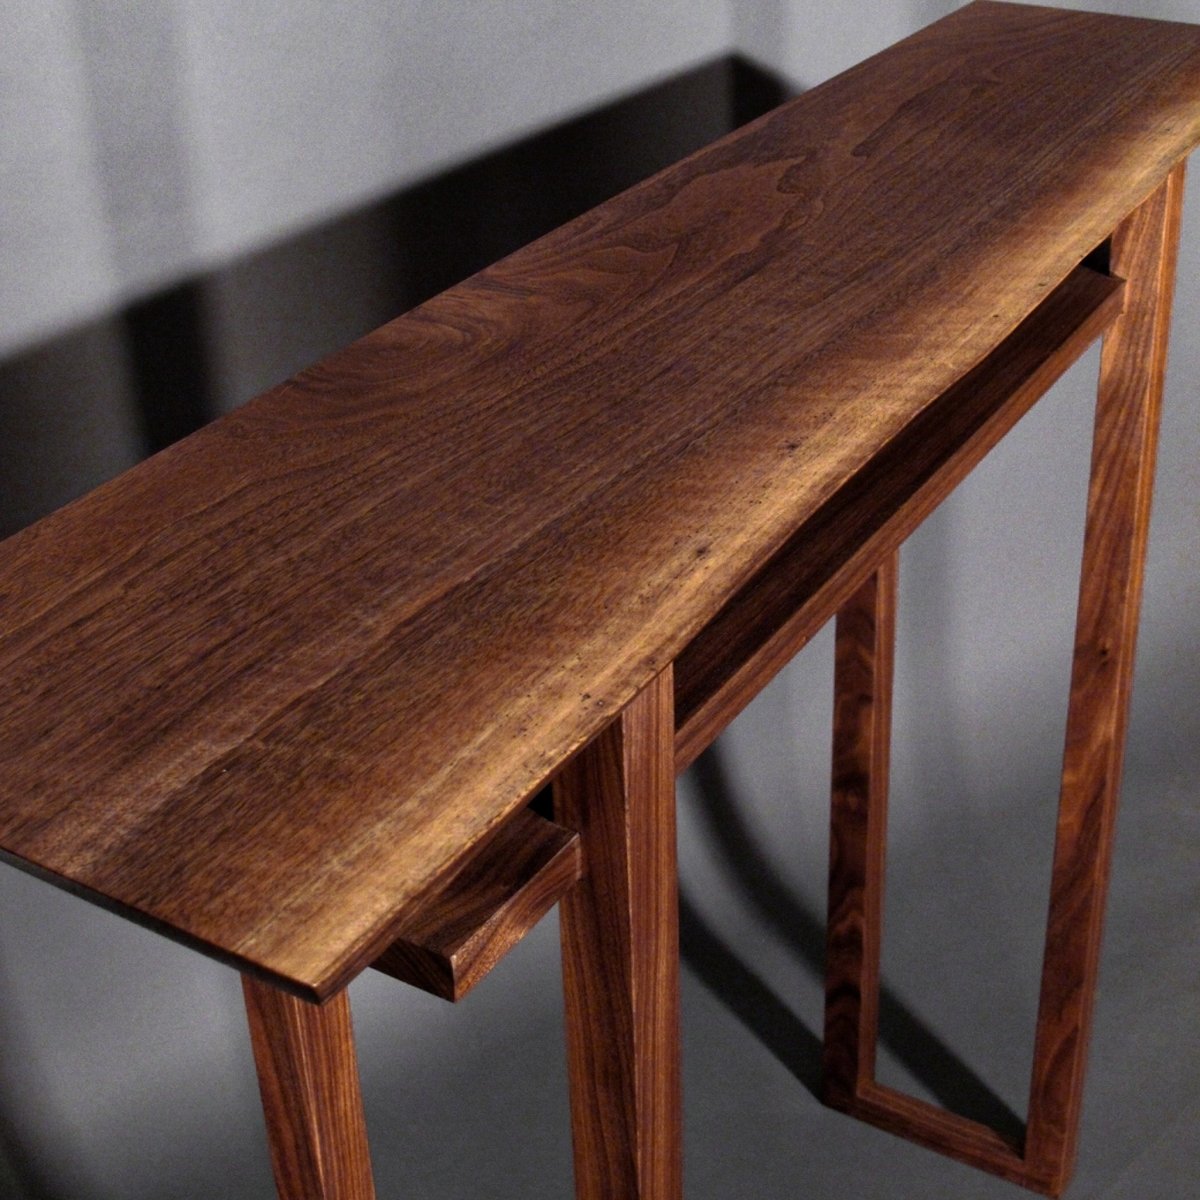 Add a natural edge table top to your walnut custom console table with MokuzaiFurniture